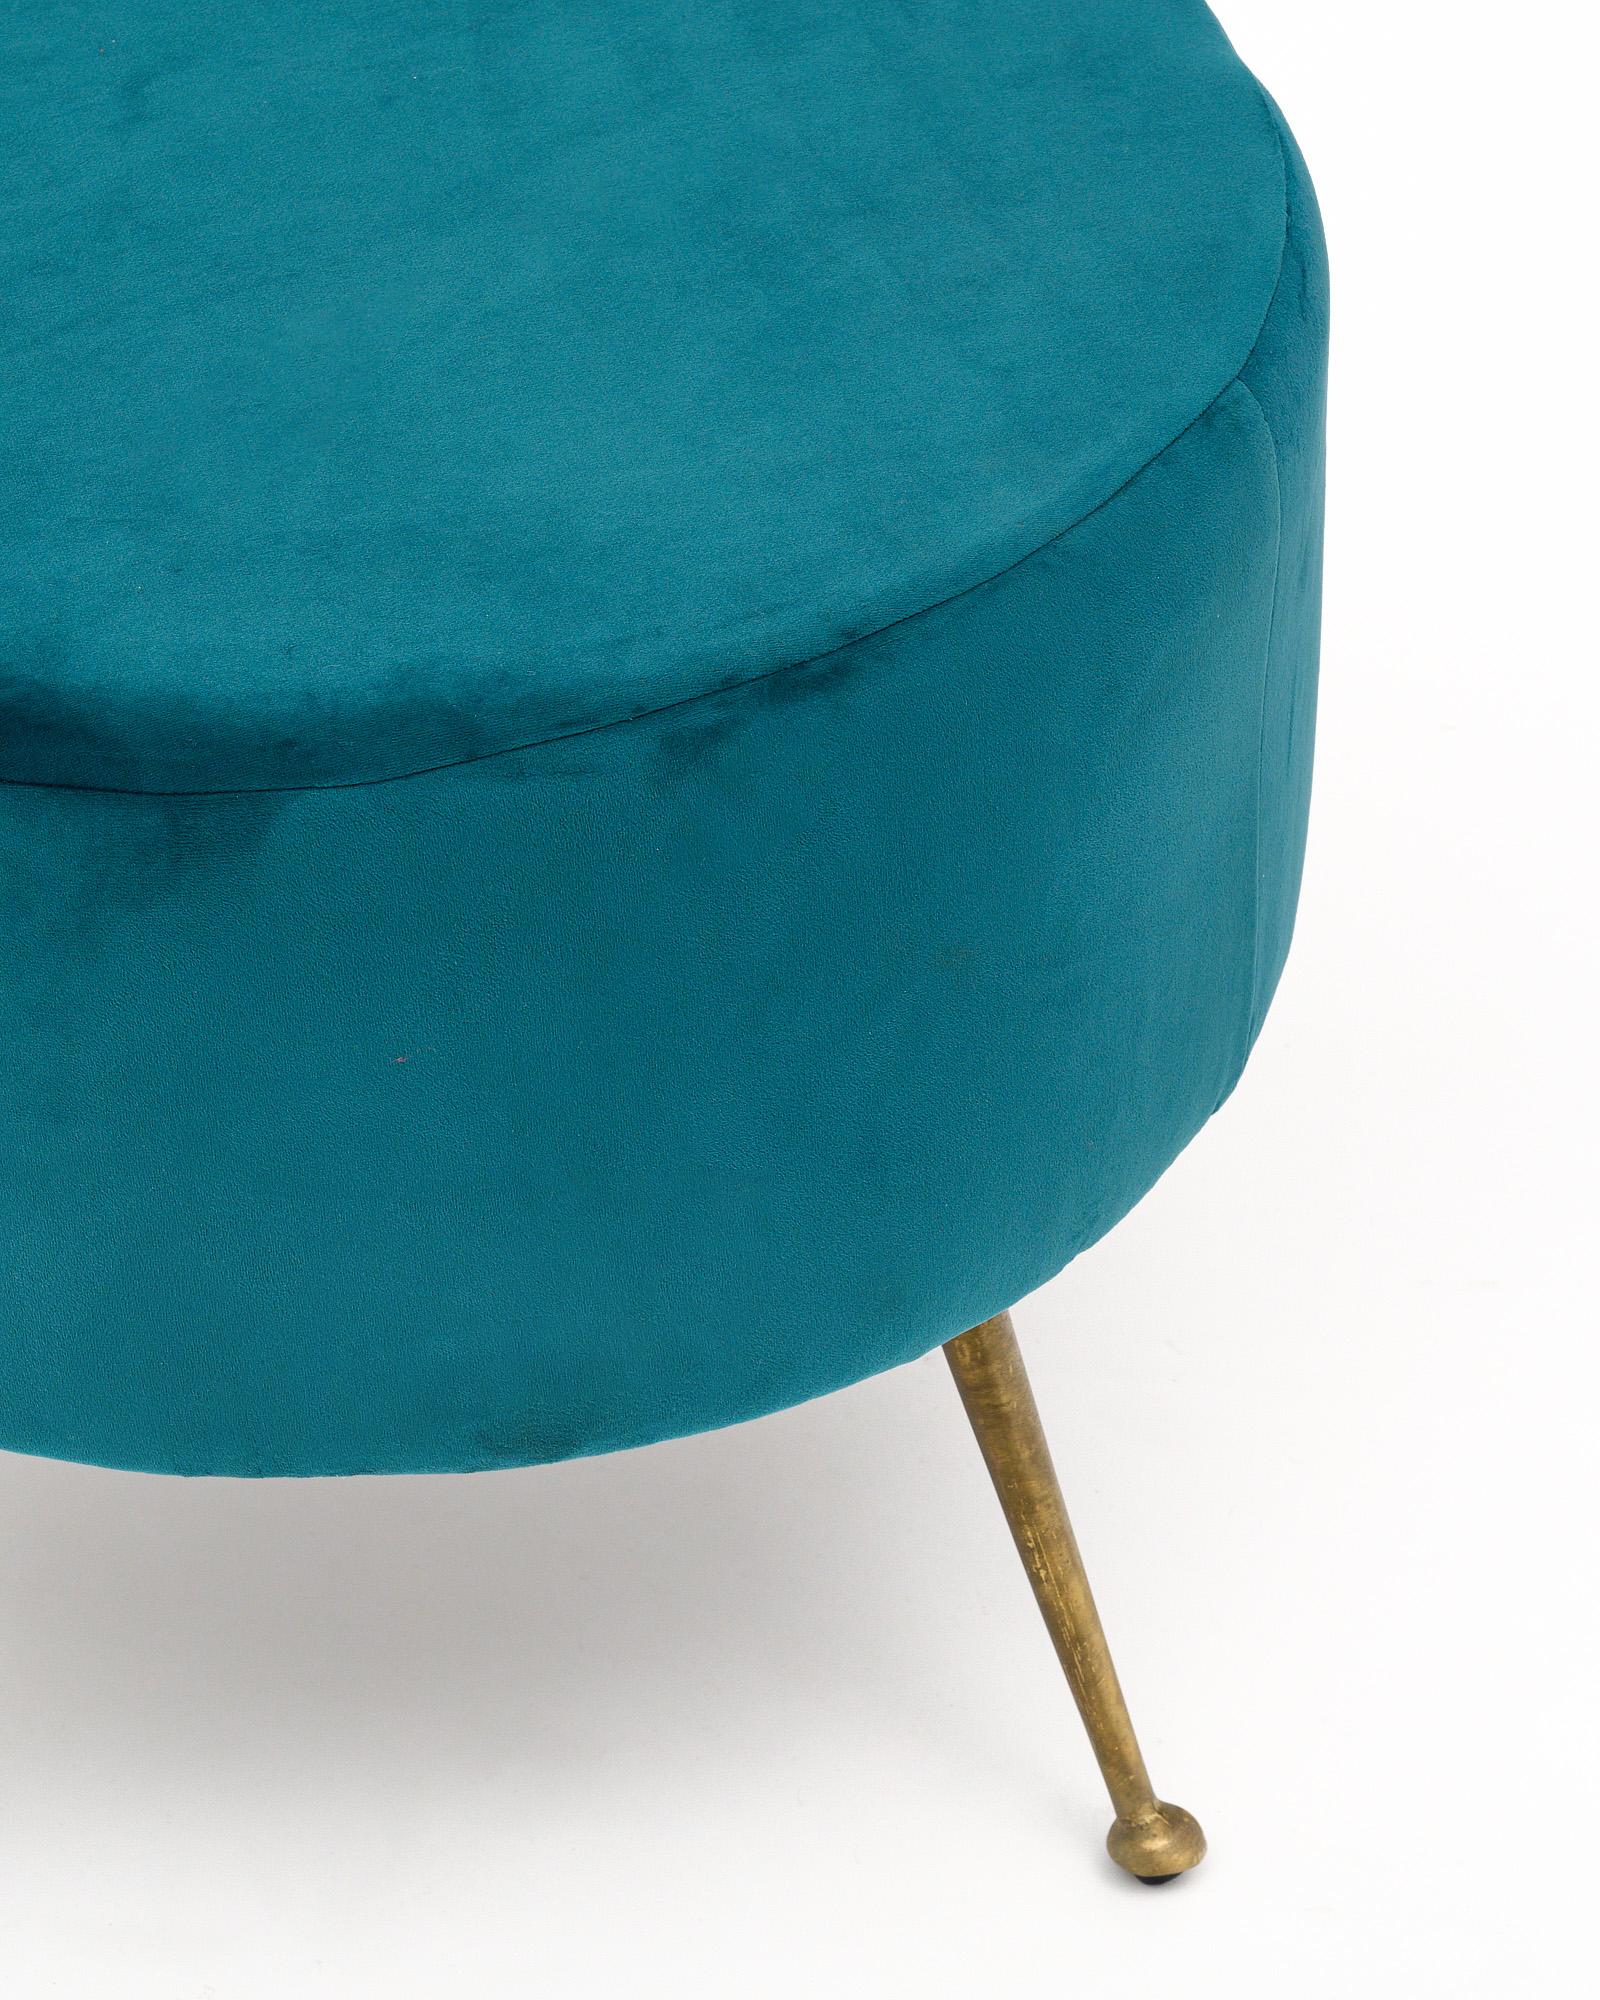 Vintage Italian Teal Stools In Good Condition For Sale In Austin, TX